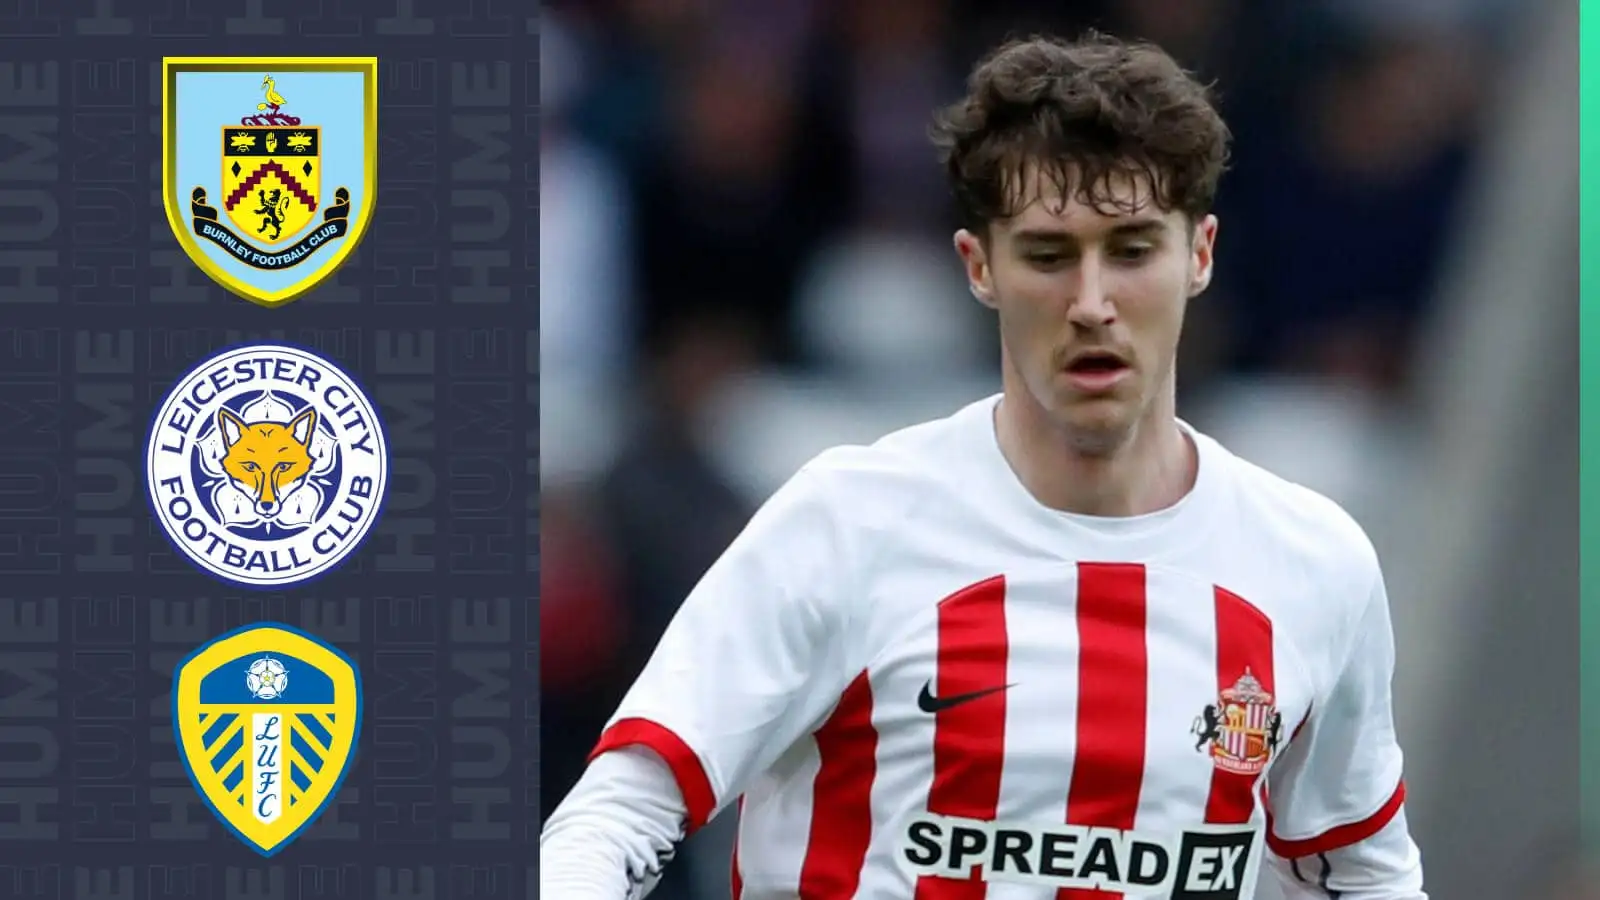 Sunderland defender Trai Hume next to the Burnley, Leicester City and Leeds United badges